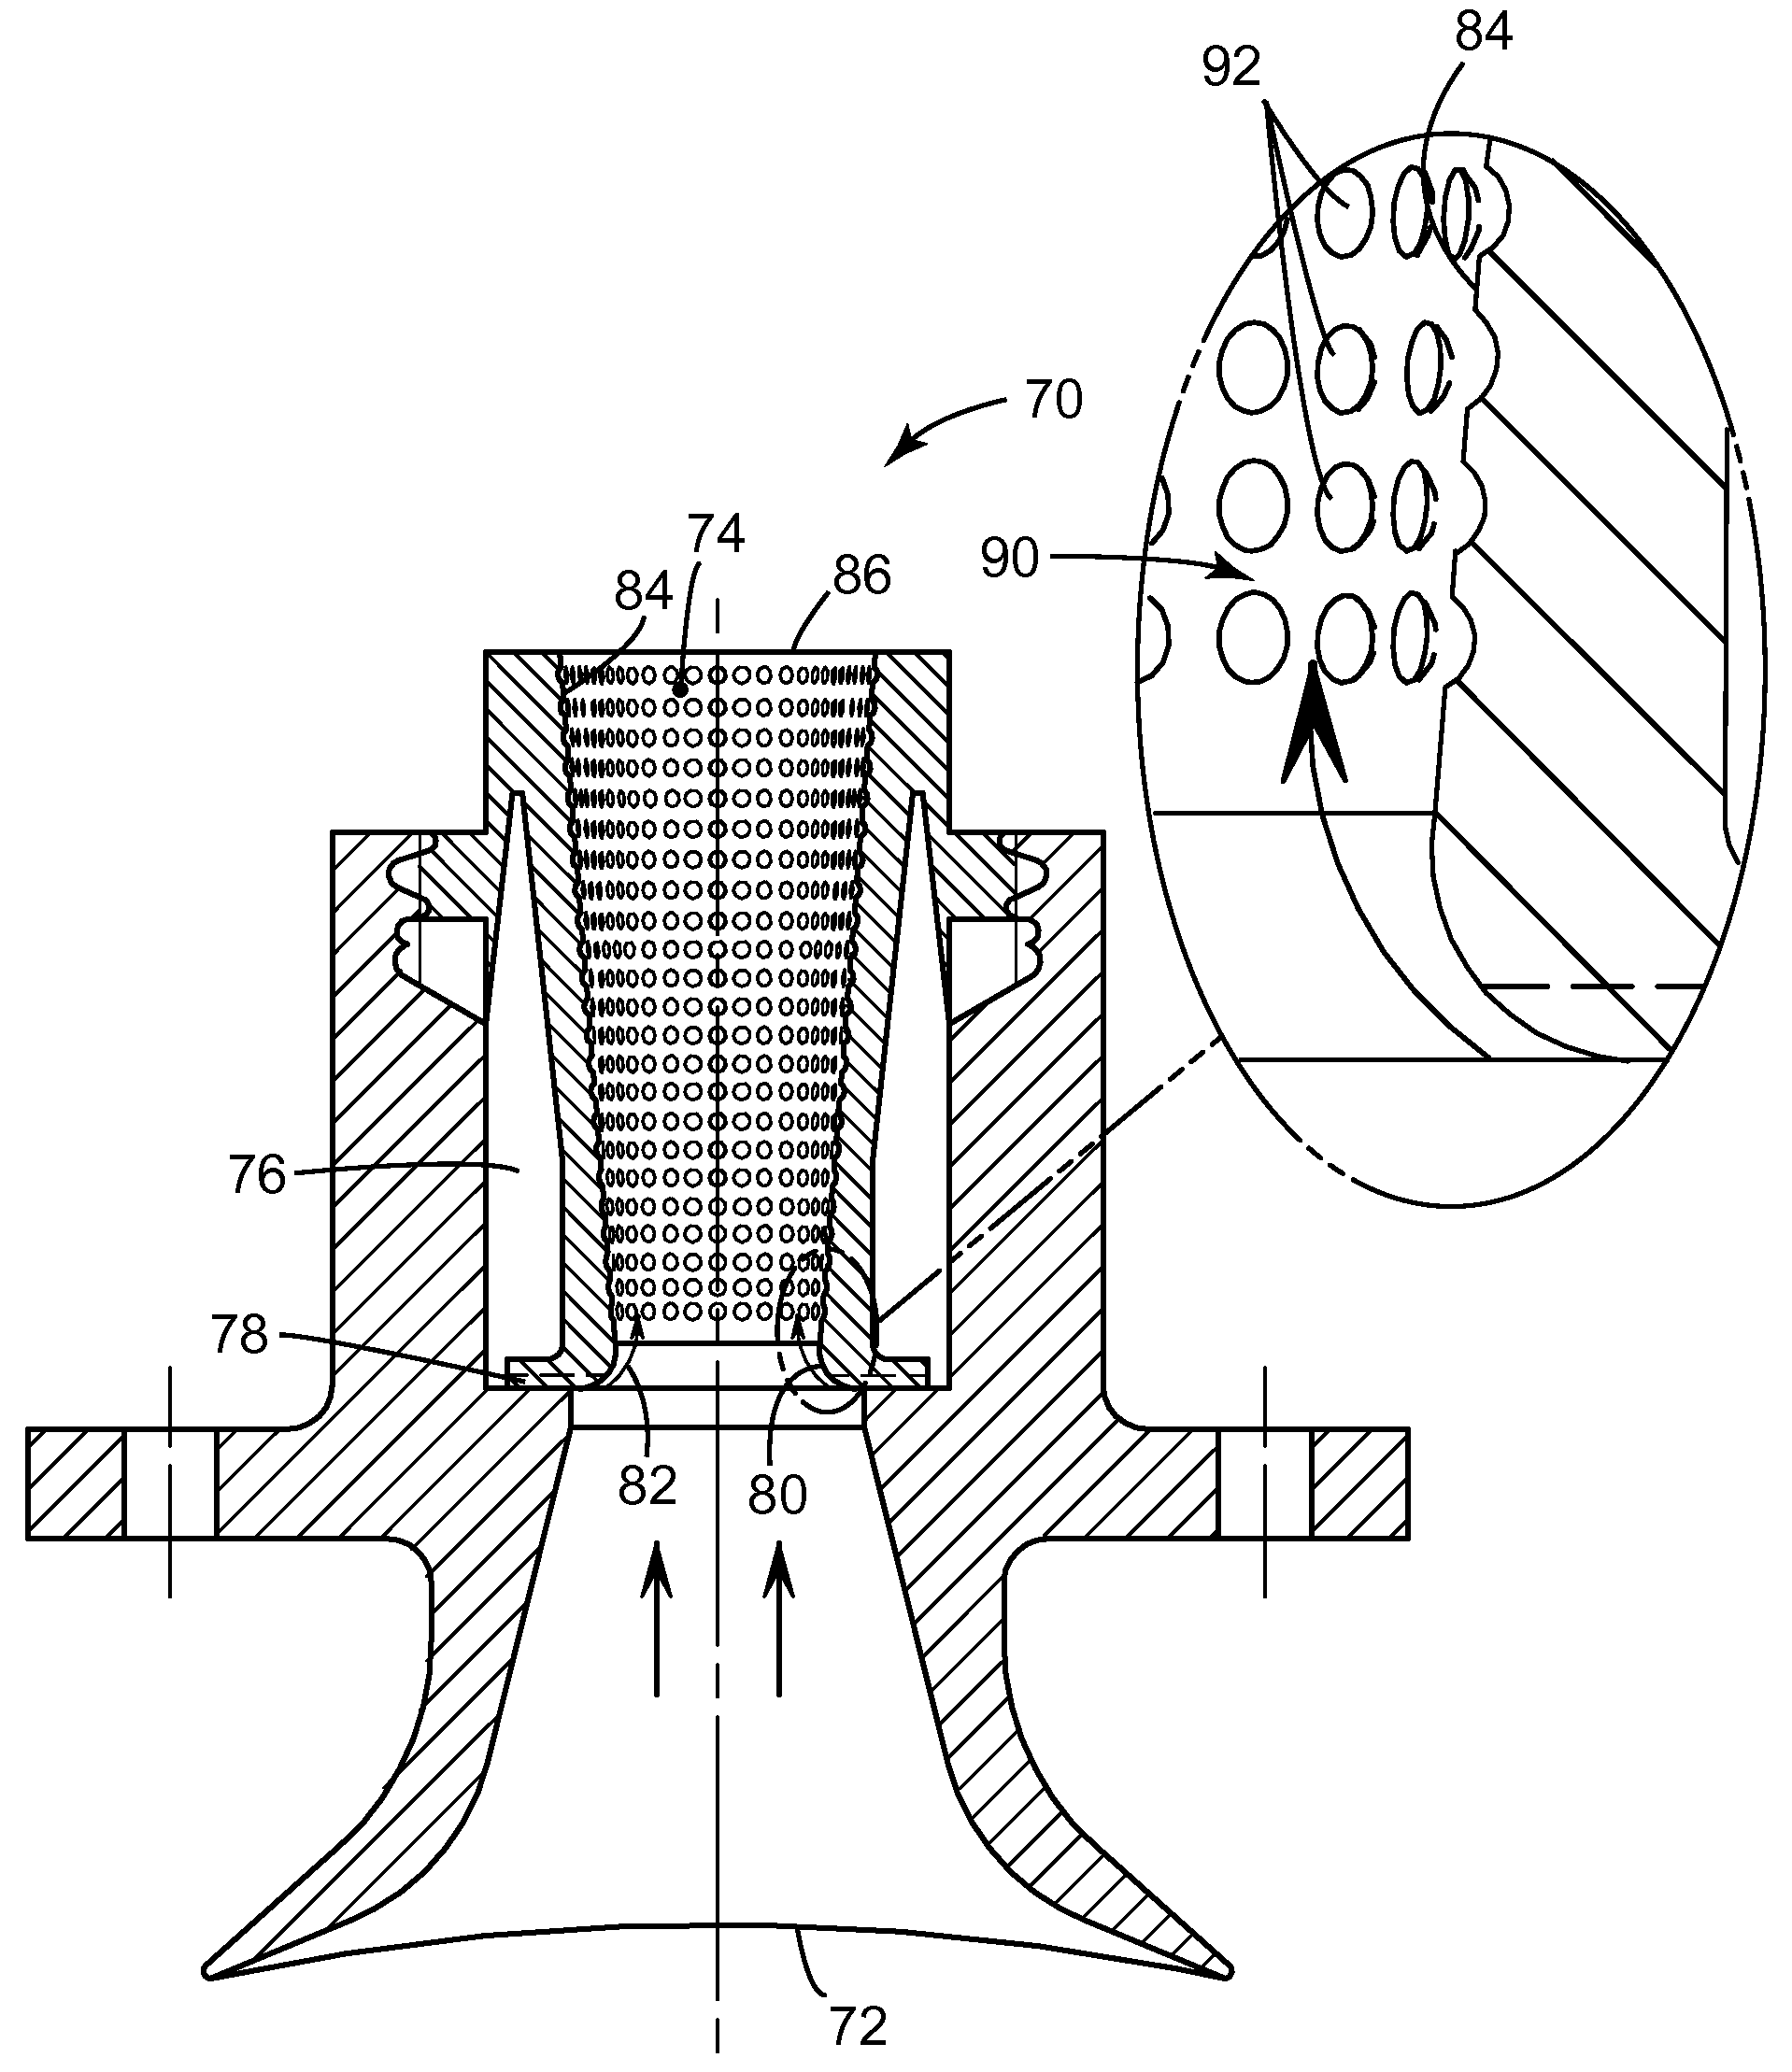 Method and apparatus for enhanced mixing in premixing devices